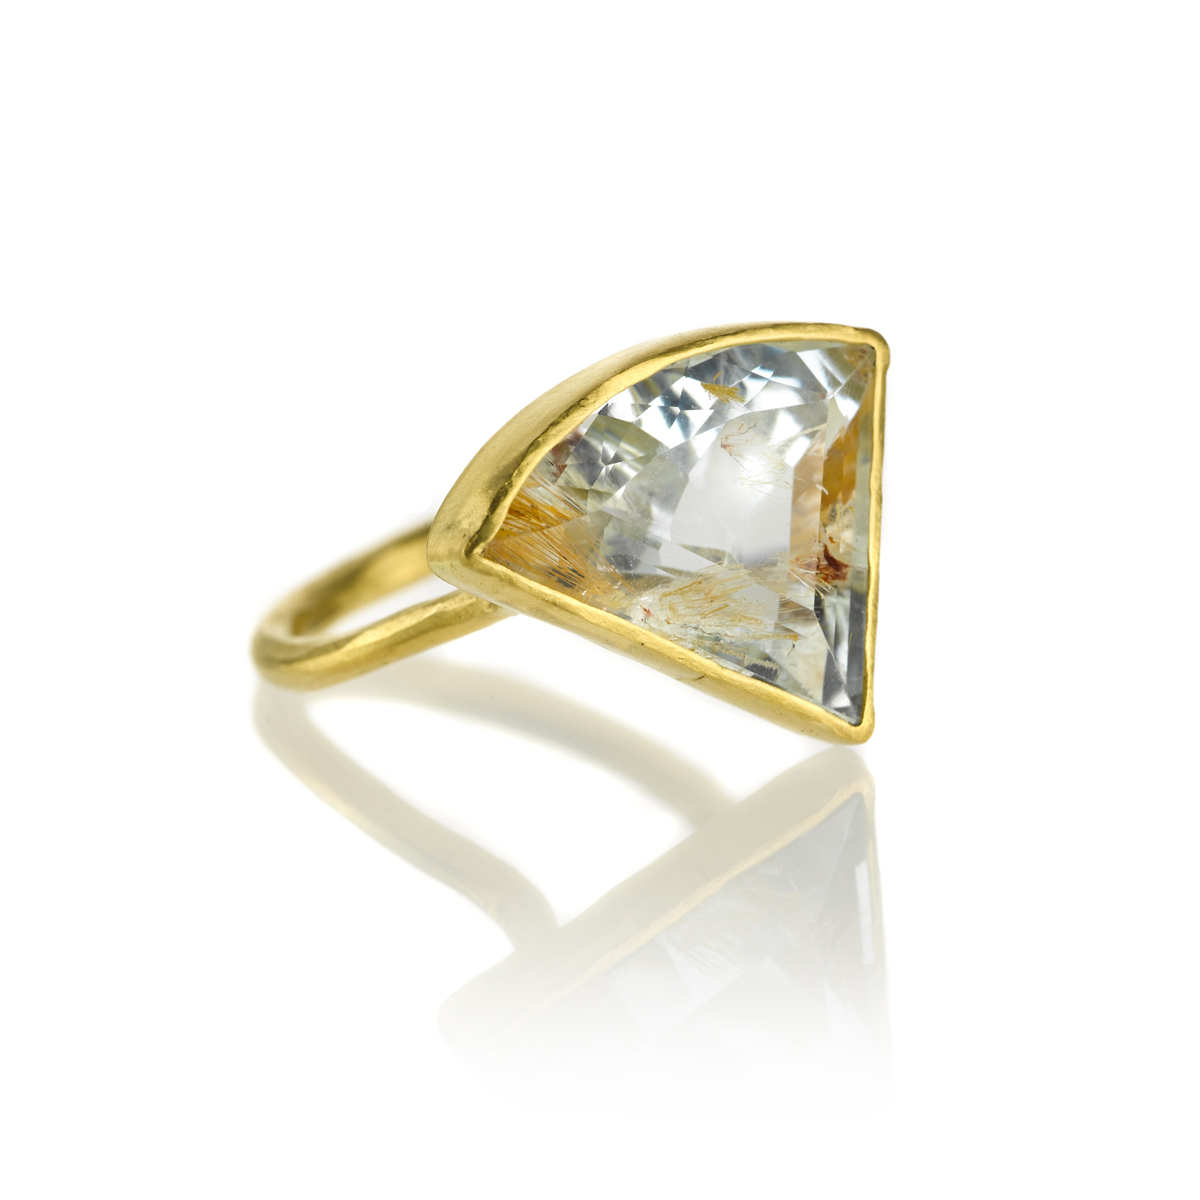  Loving the shape of this 22k gold ring with rutilated topaz,&nbsp;$3,720. 